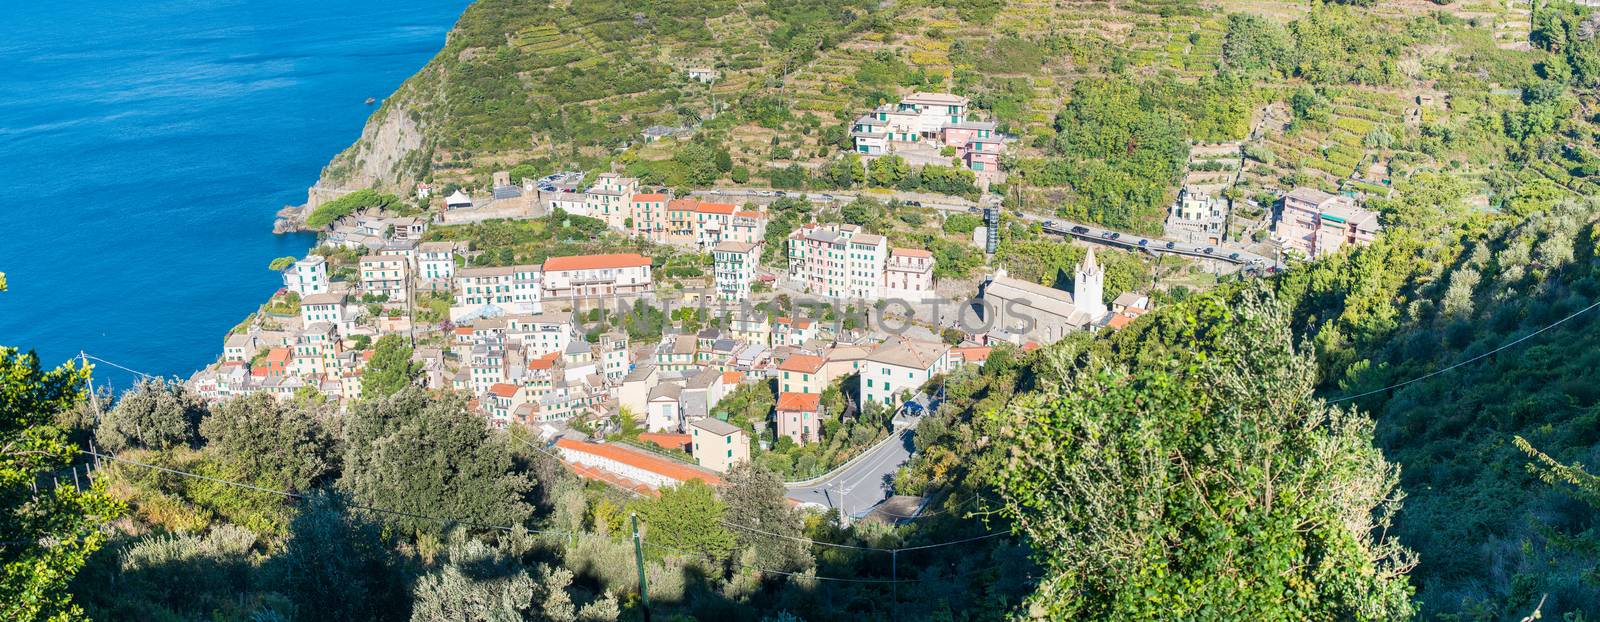 Aerial view of Riomaggiore on a sunny day. Five Lands, Italy.